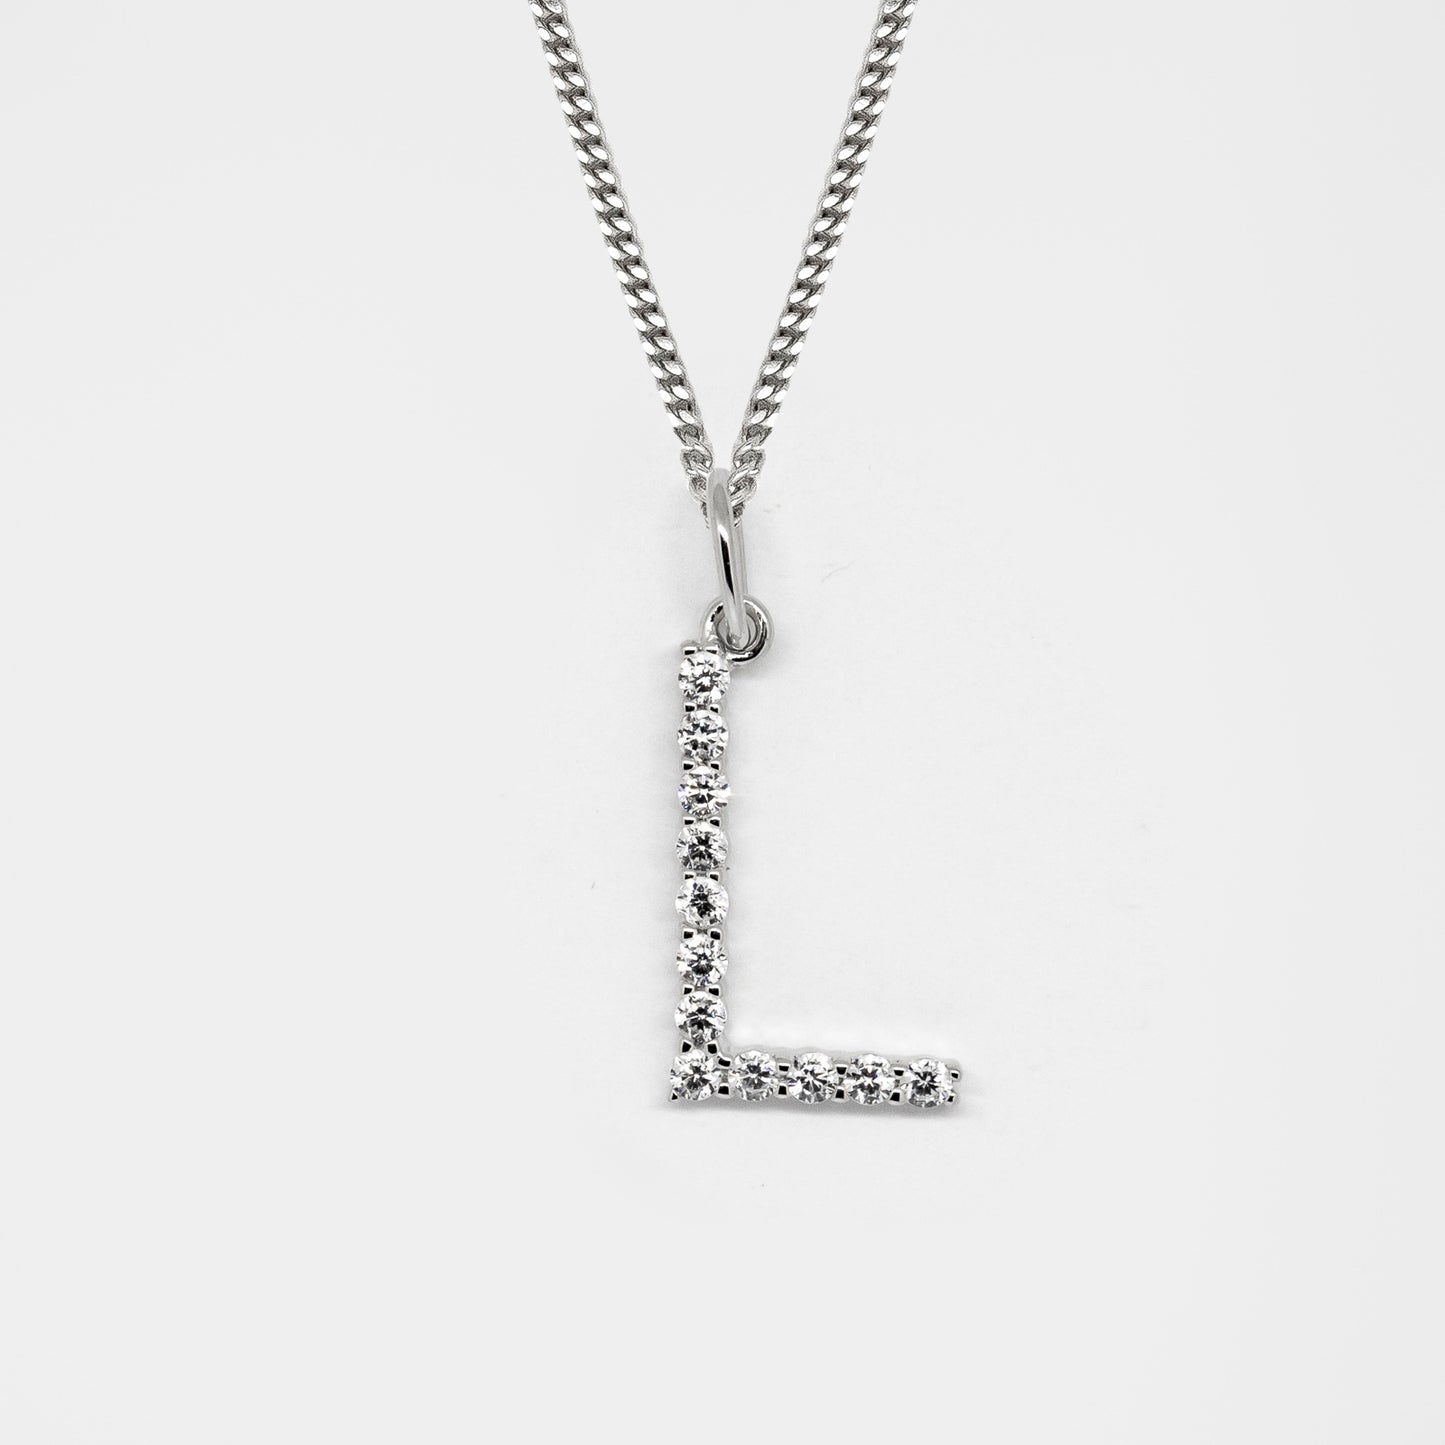 Silver 925 Initial Necklace - L